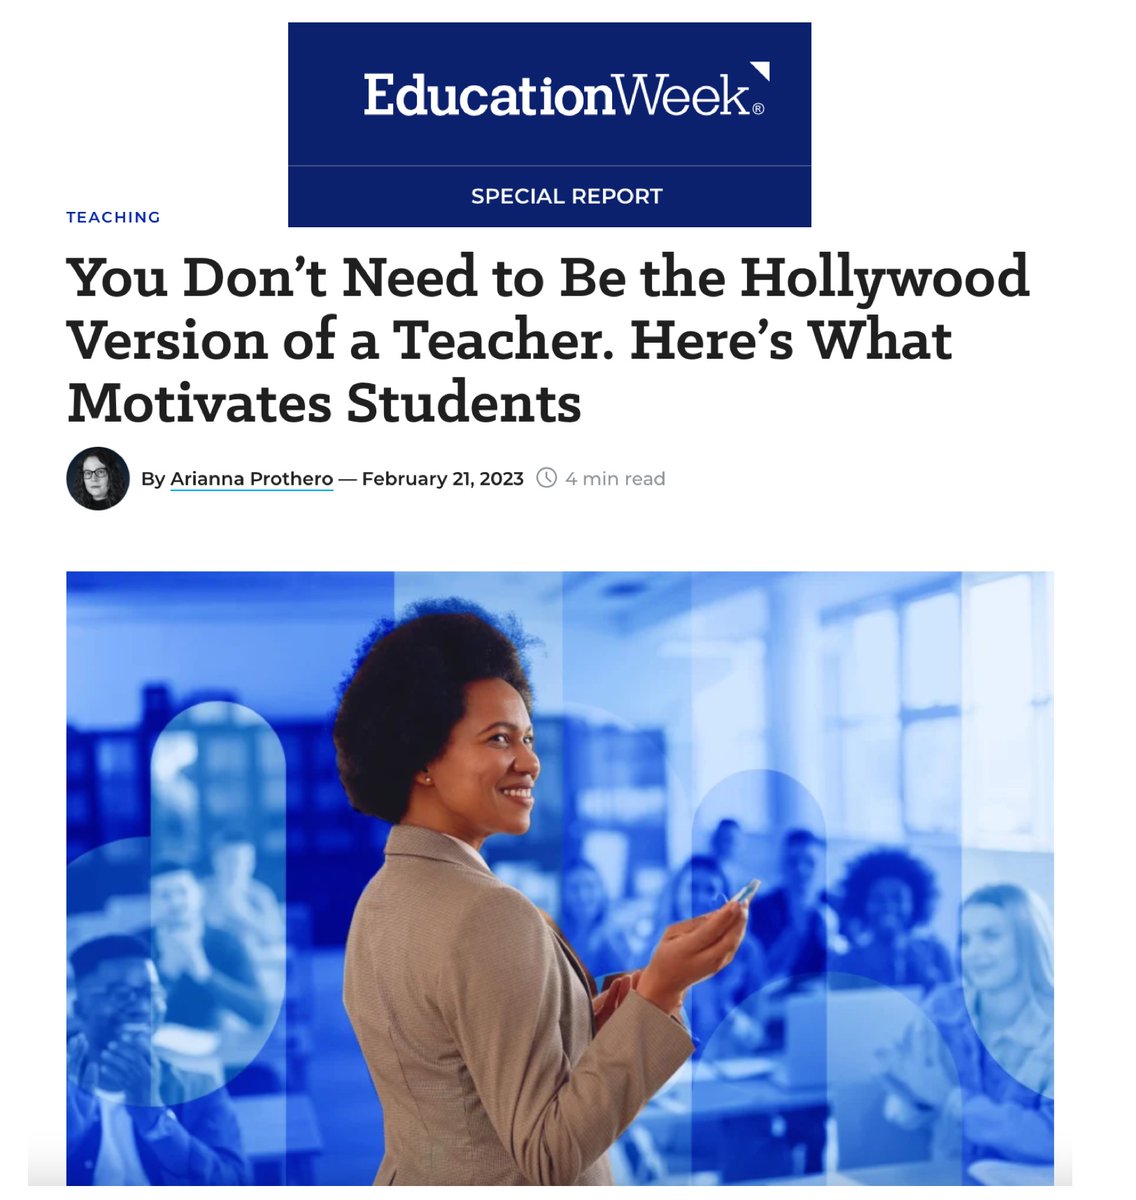 Big thanks to @AriannaProthero & @educationweek for this feature on motivation and engagement! Full Article: tinyurl.com/EdWeekMotivati…